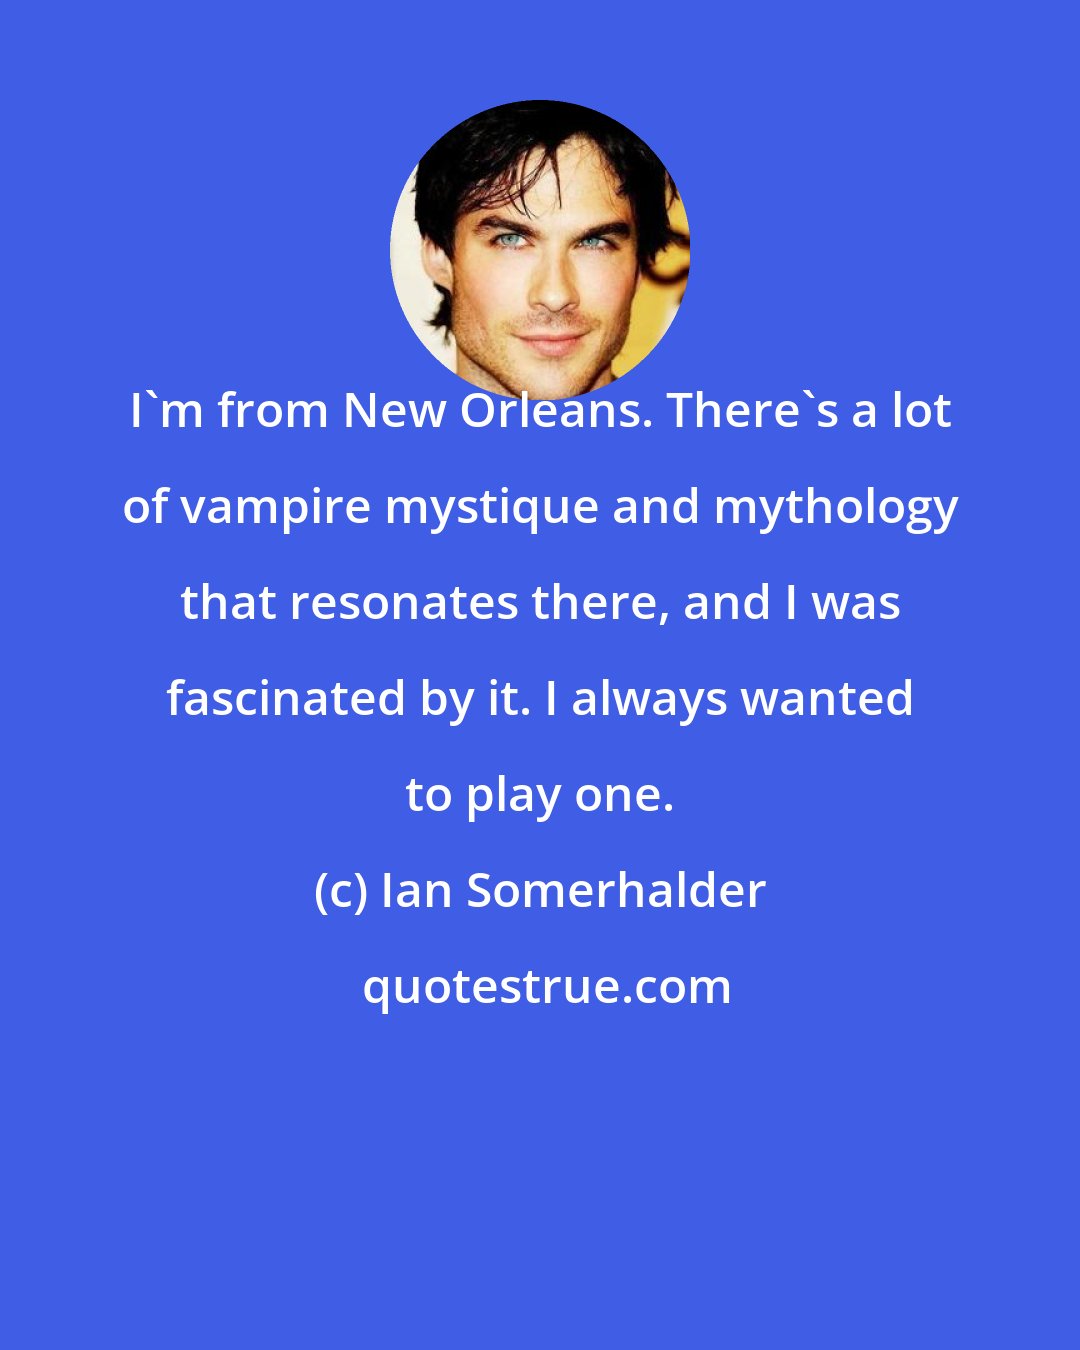 Ian Somerhalder: I'm from New Orleans. There's a lot of vampire mystique and mythology that resonates there, and I was fascinated by it. I always wanted to play one.